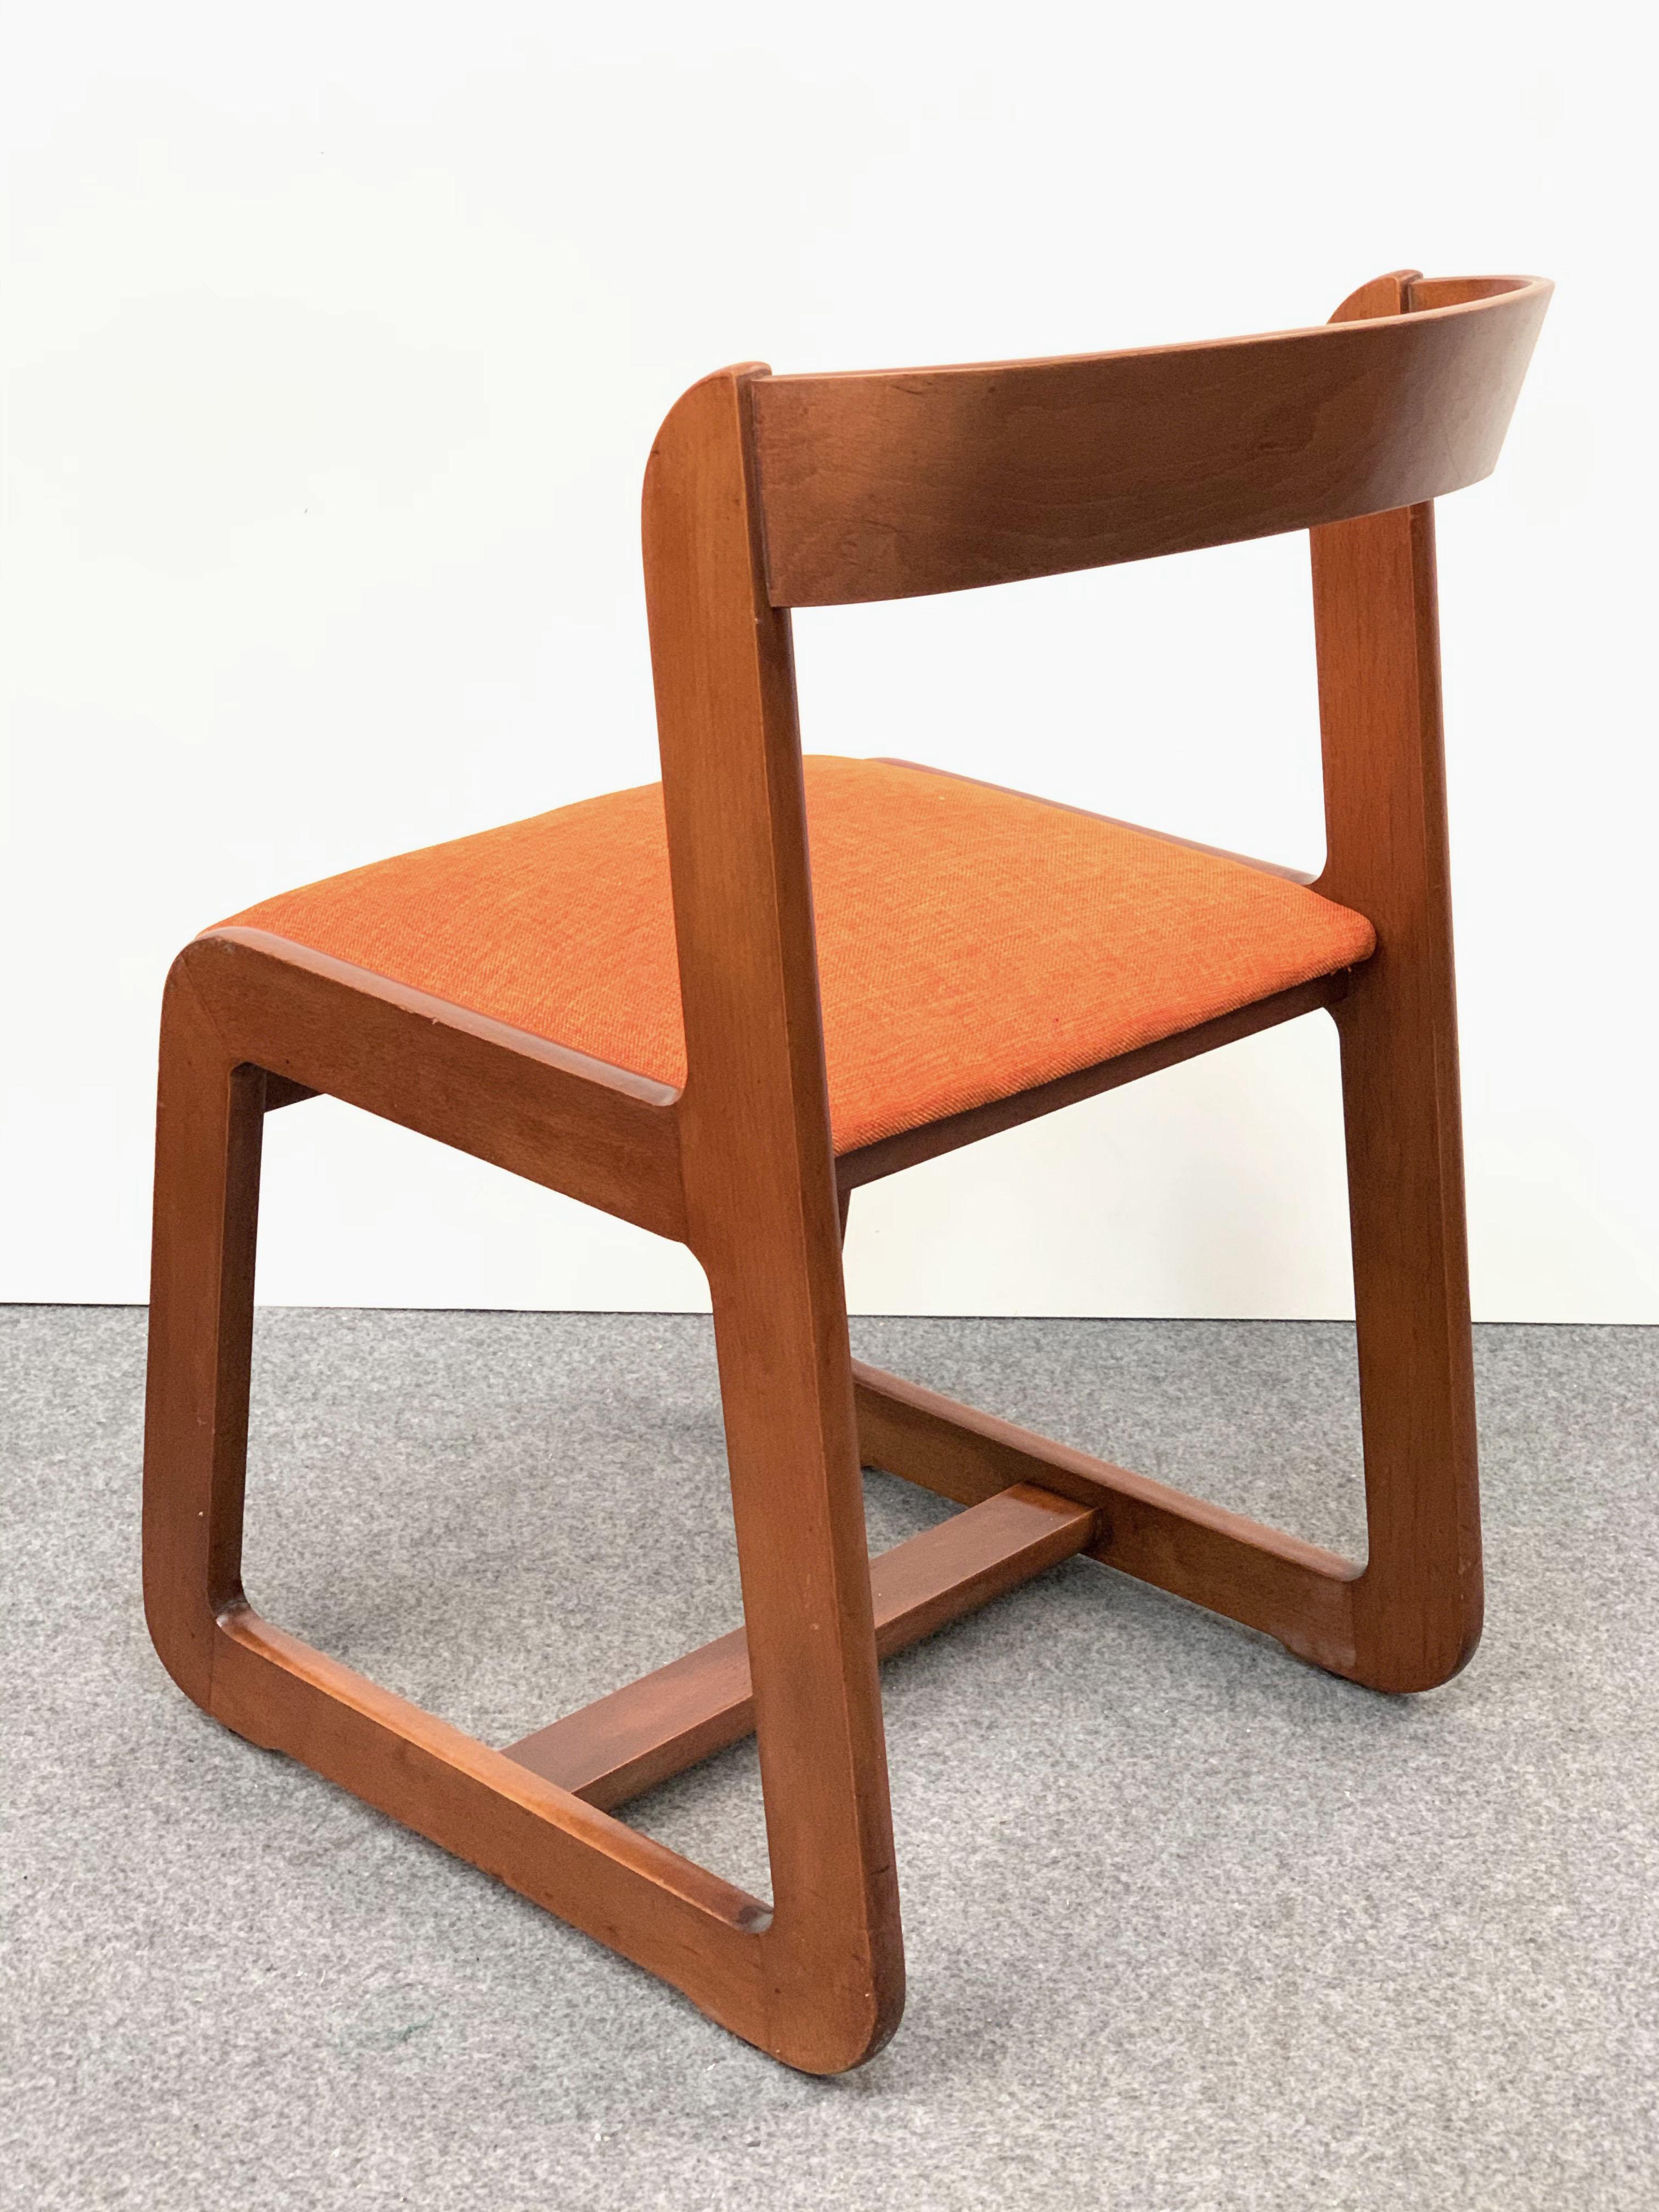 Late 20th Century Willy Rizzo Midcentury Italian Wooden and Orange Fabric Chairs, Mario Sabot 1970